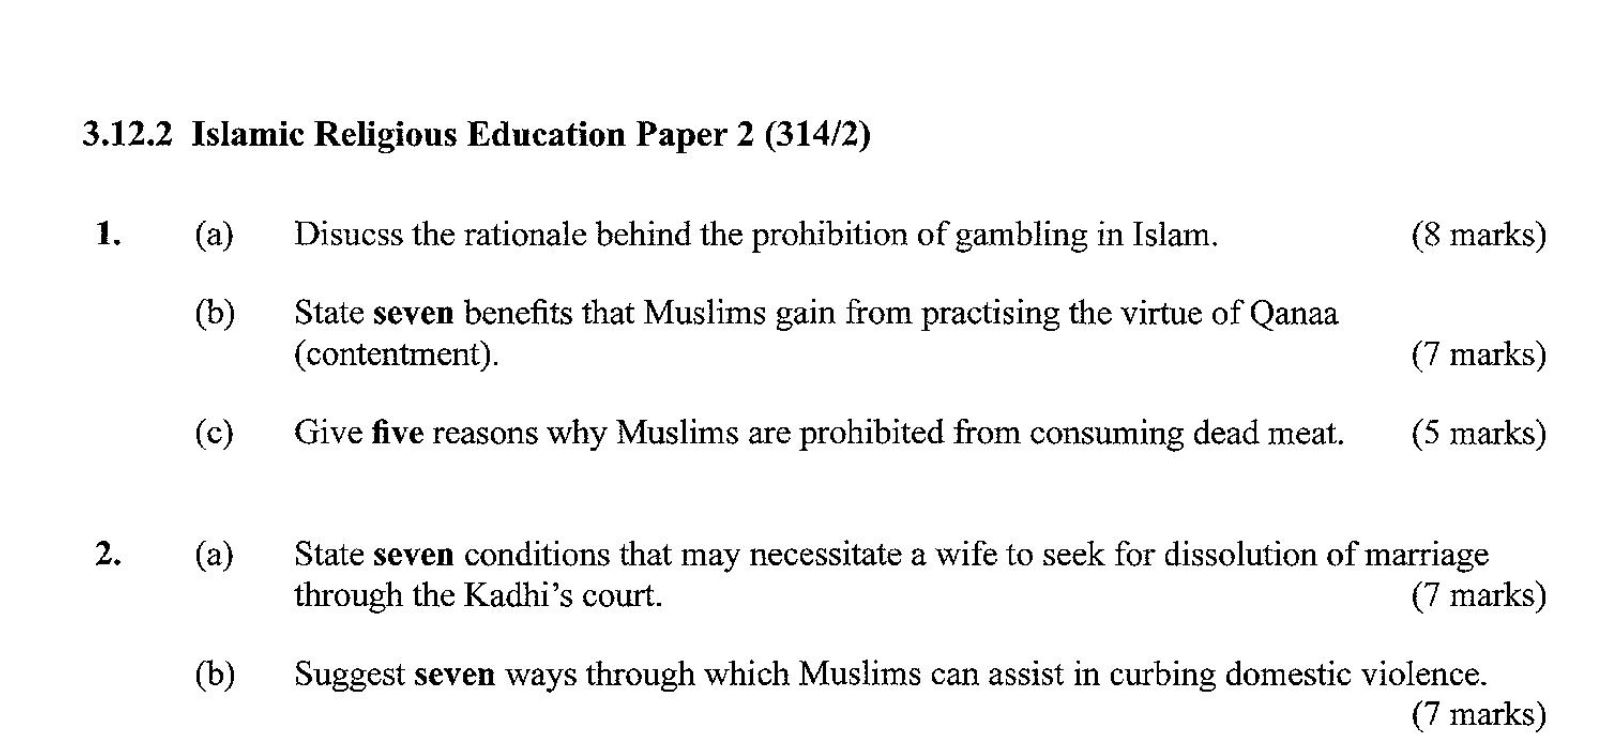 KCSE Islamic Paper 2, 2018 with Marking Scheme (Answers)